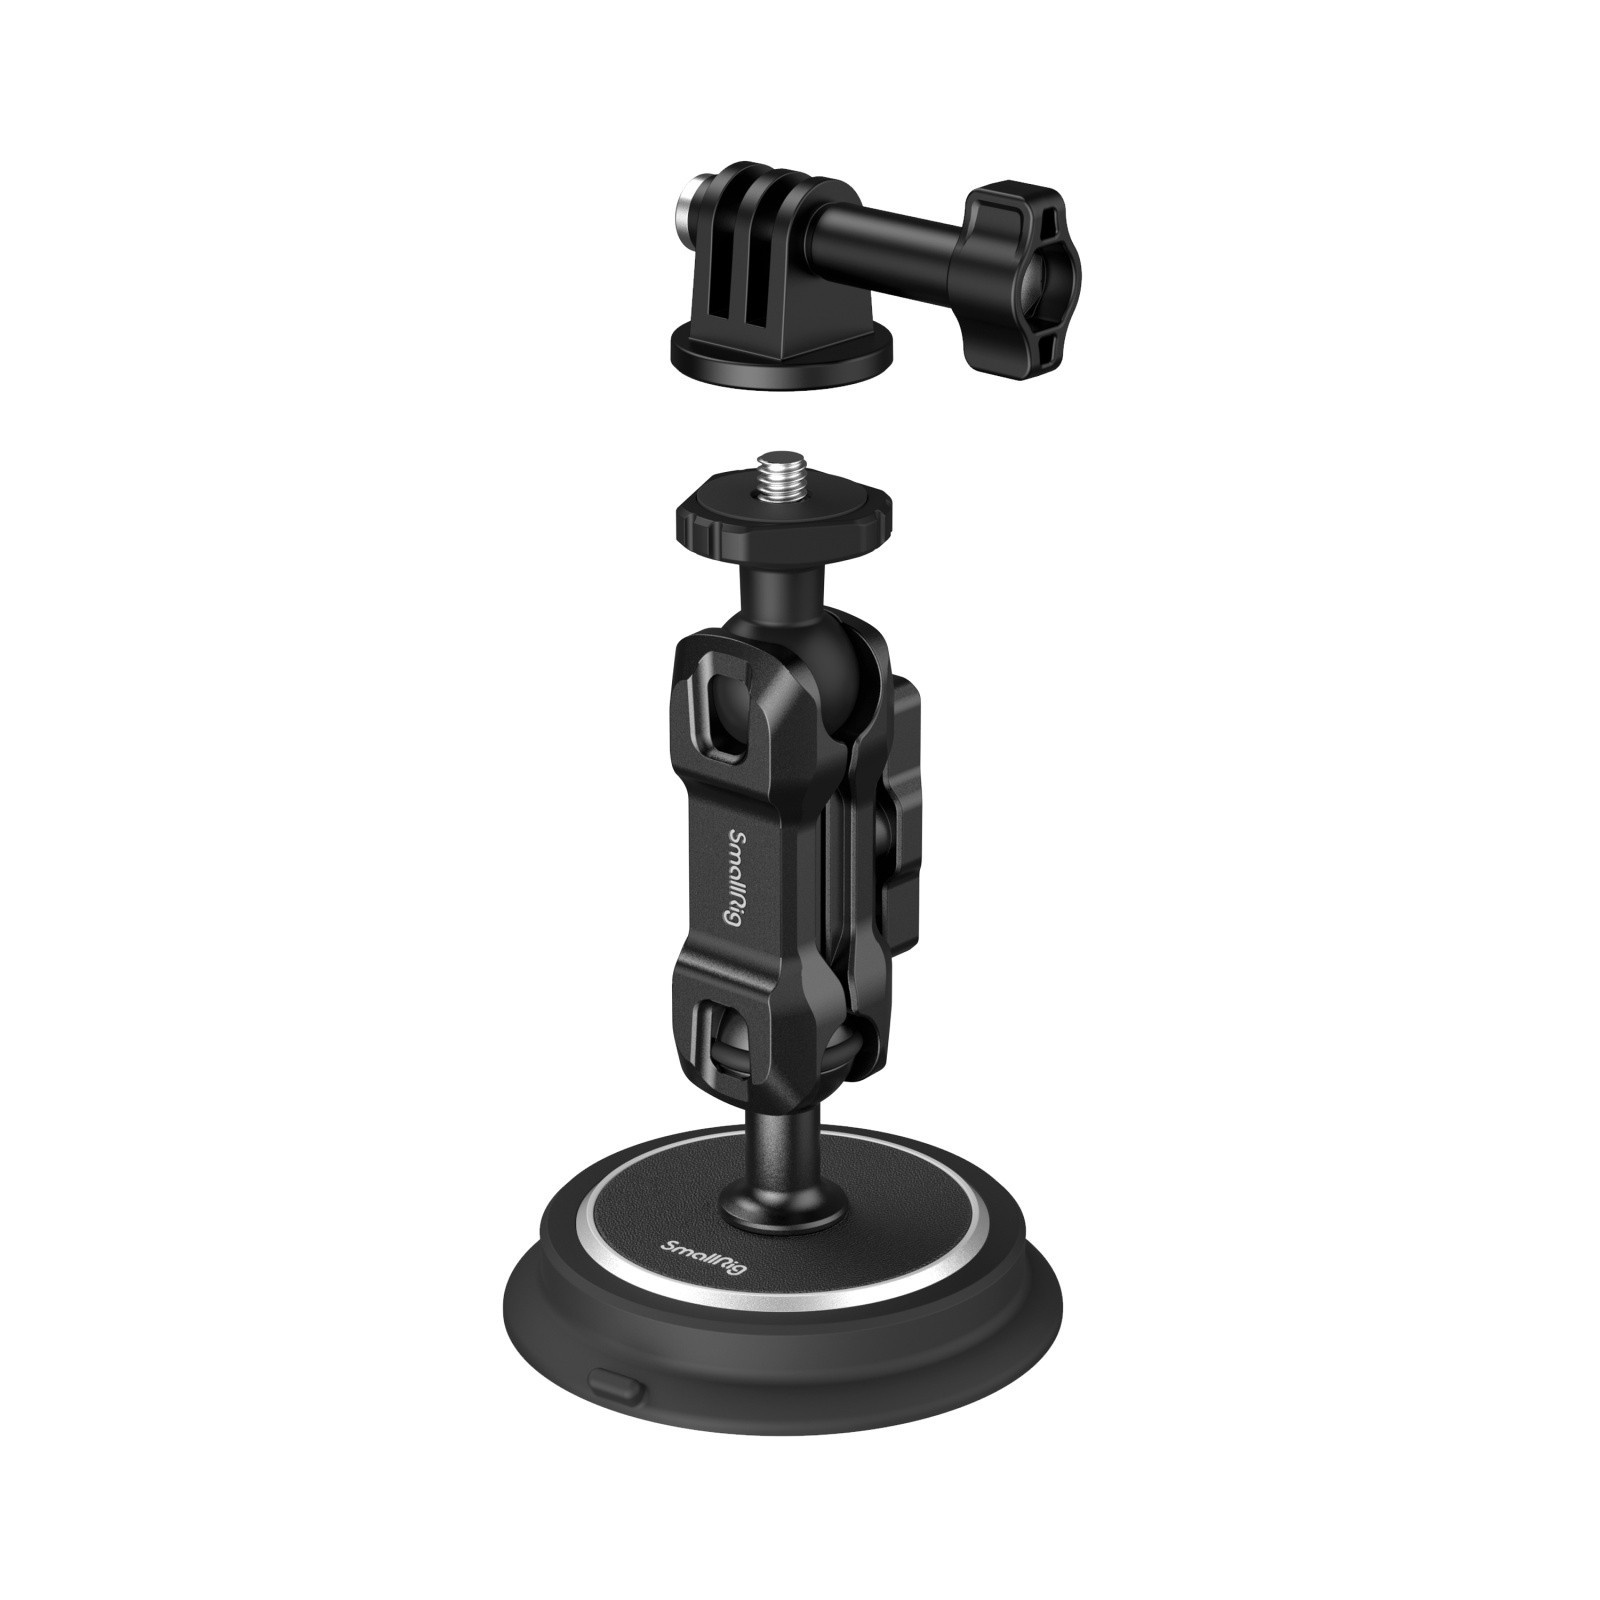 SmallRig 4466 Magic Arm Magnetic Suction Cup Mounting Support Kit for Action Cameras